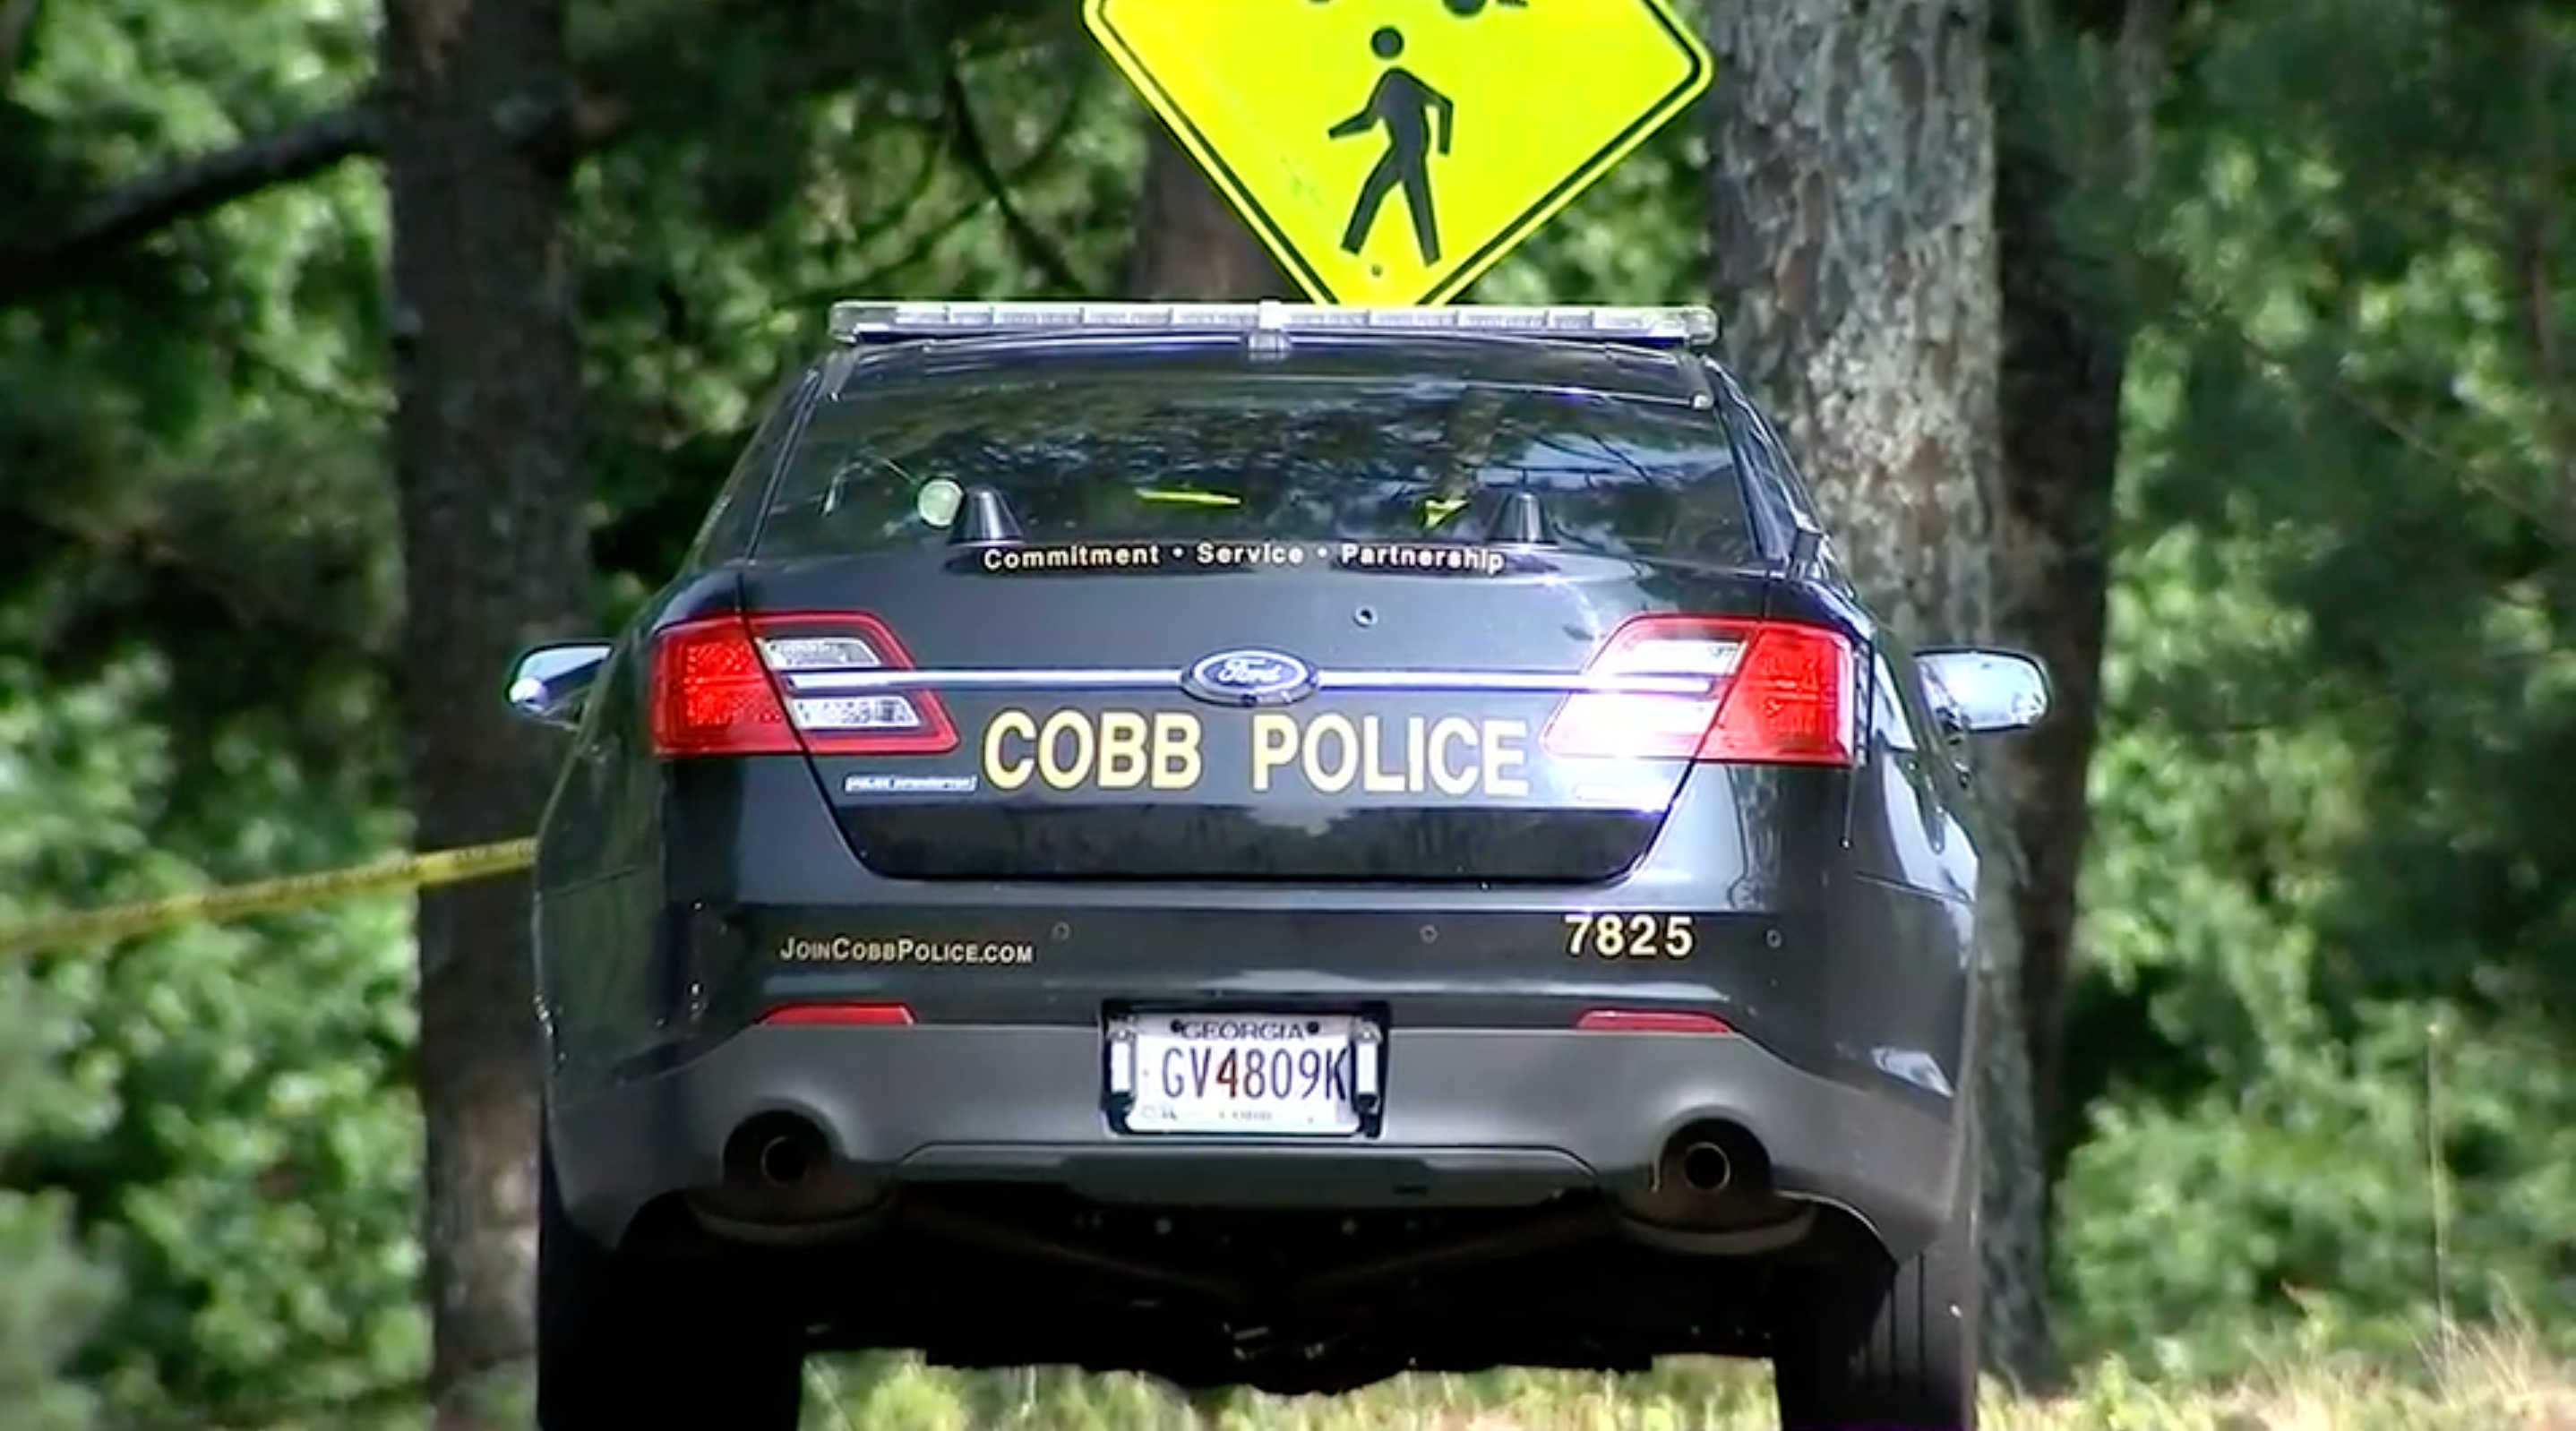 Police are still looking for the shooter suspected to have shot three people dead over the Fourth of July weekend at a country club in Cobb County, Georgia.